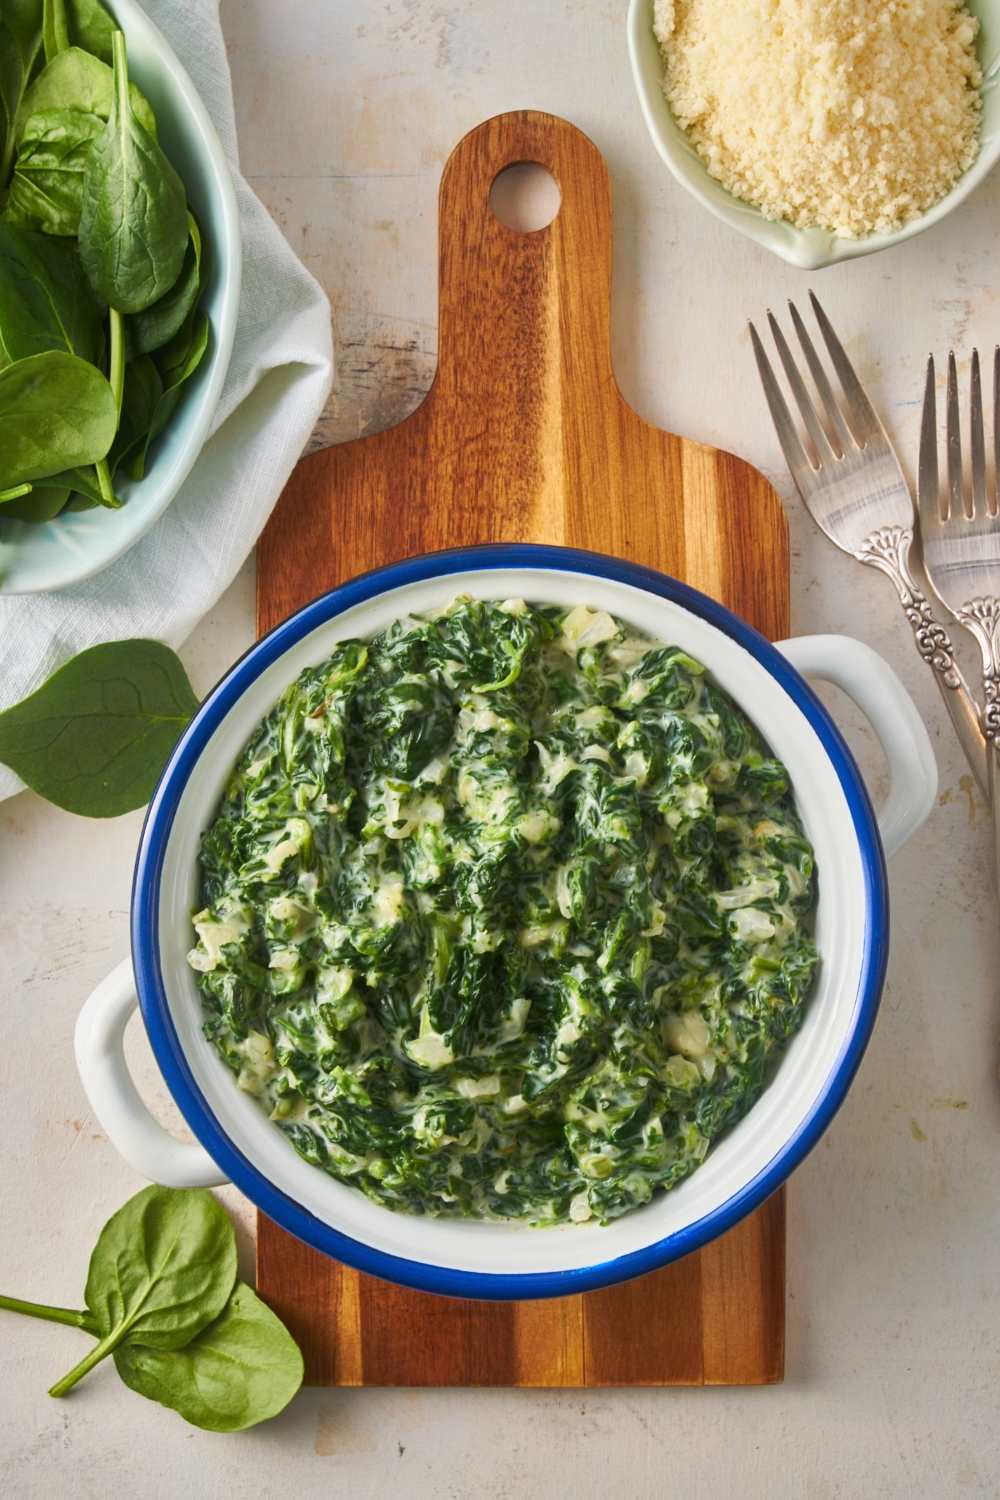 Overhead view of creamed spinach in a white and blue serving bowl atop a wooden board.